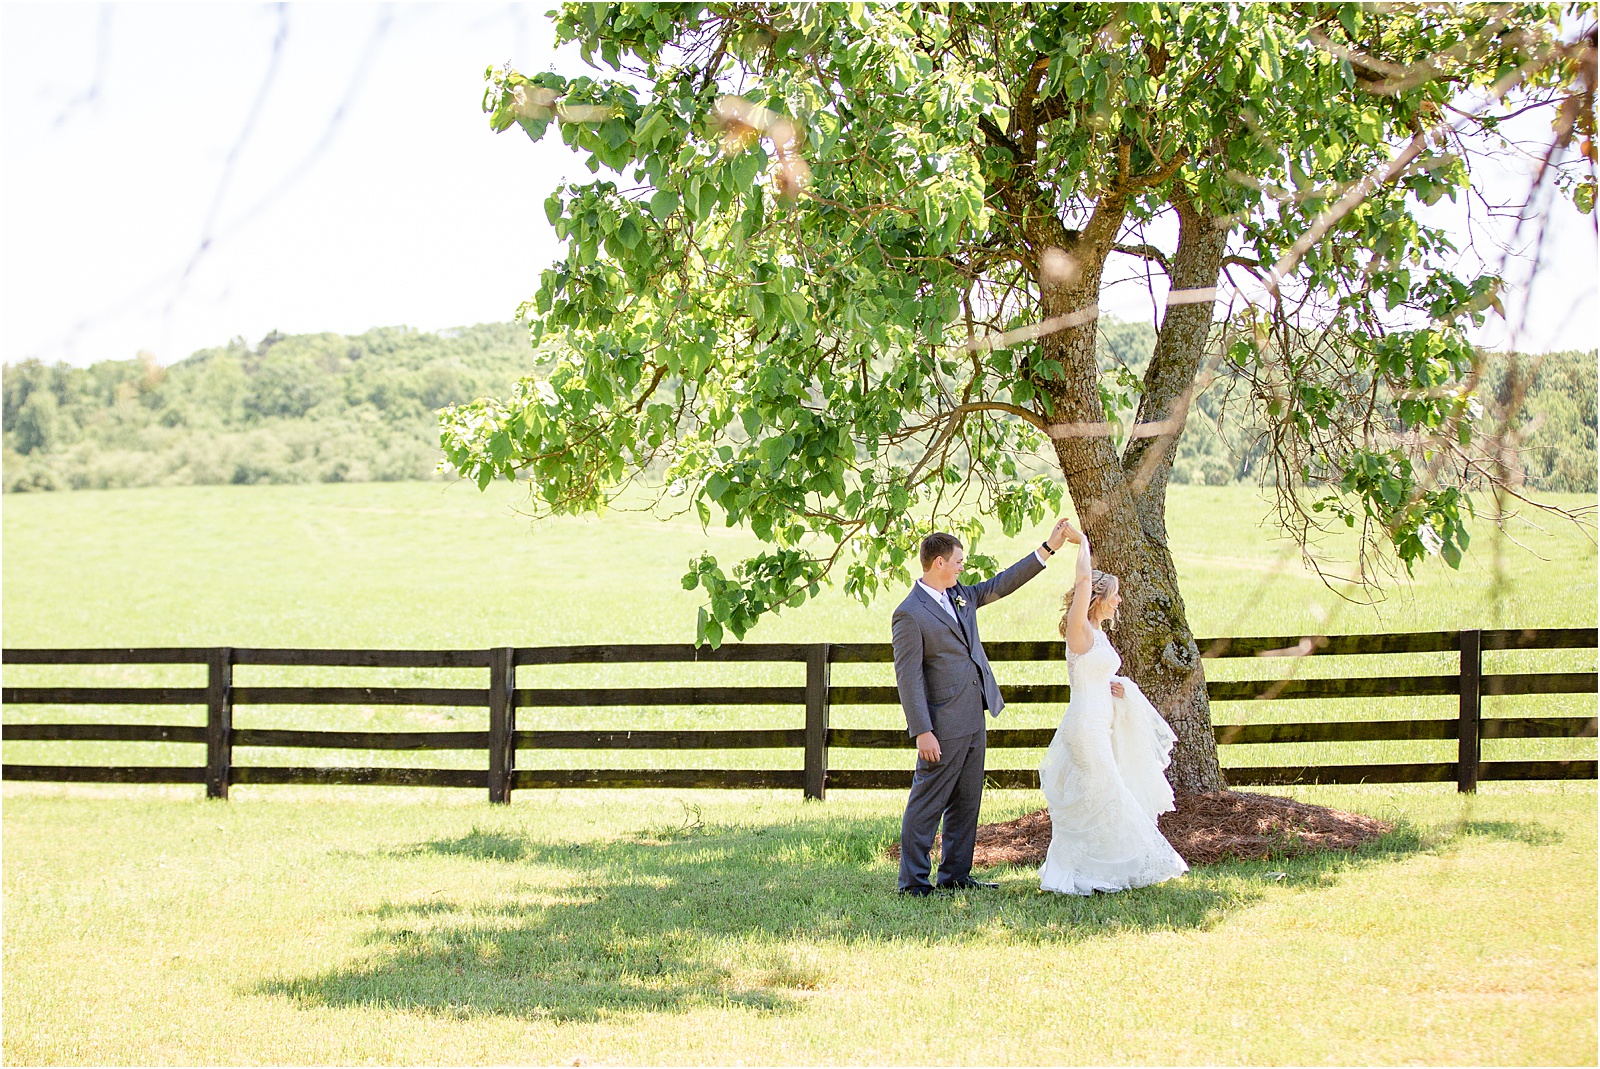 Bride and groom twirl in a field